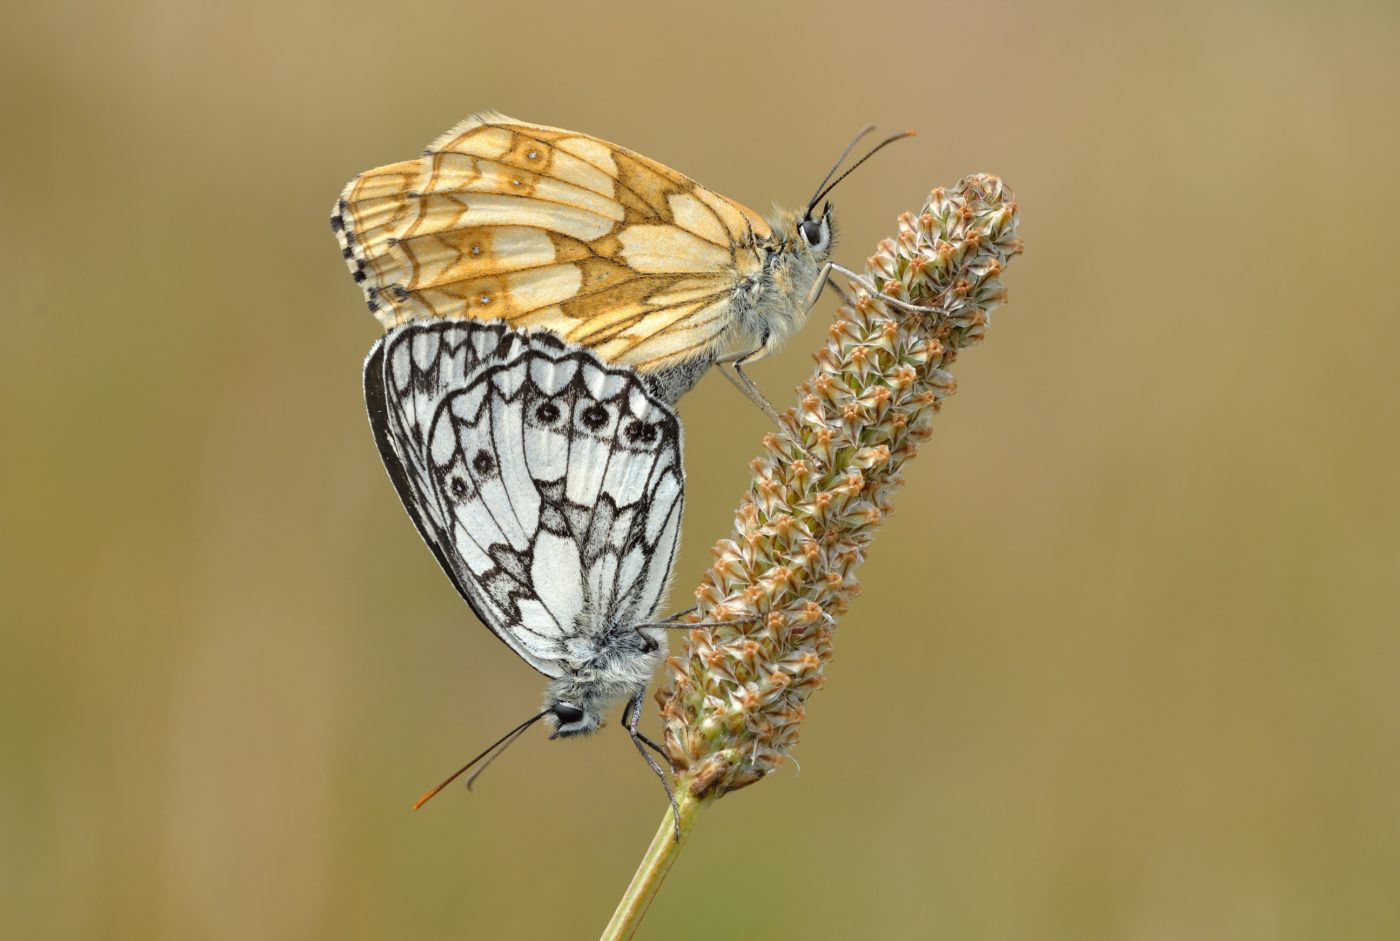 These two marbled white butterflies were photographed mating in the National Trust beauty spot of High and Over, an area of downland overlooking the Cuckmere river. The female caught Bob Eade’s eye because of the distinctive bright orange-brown colour wh